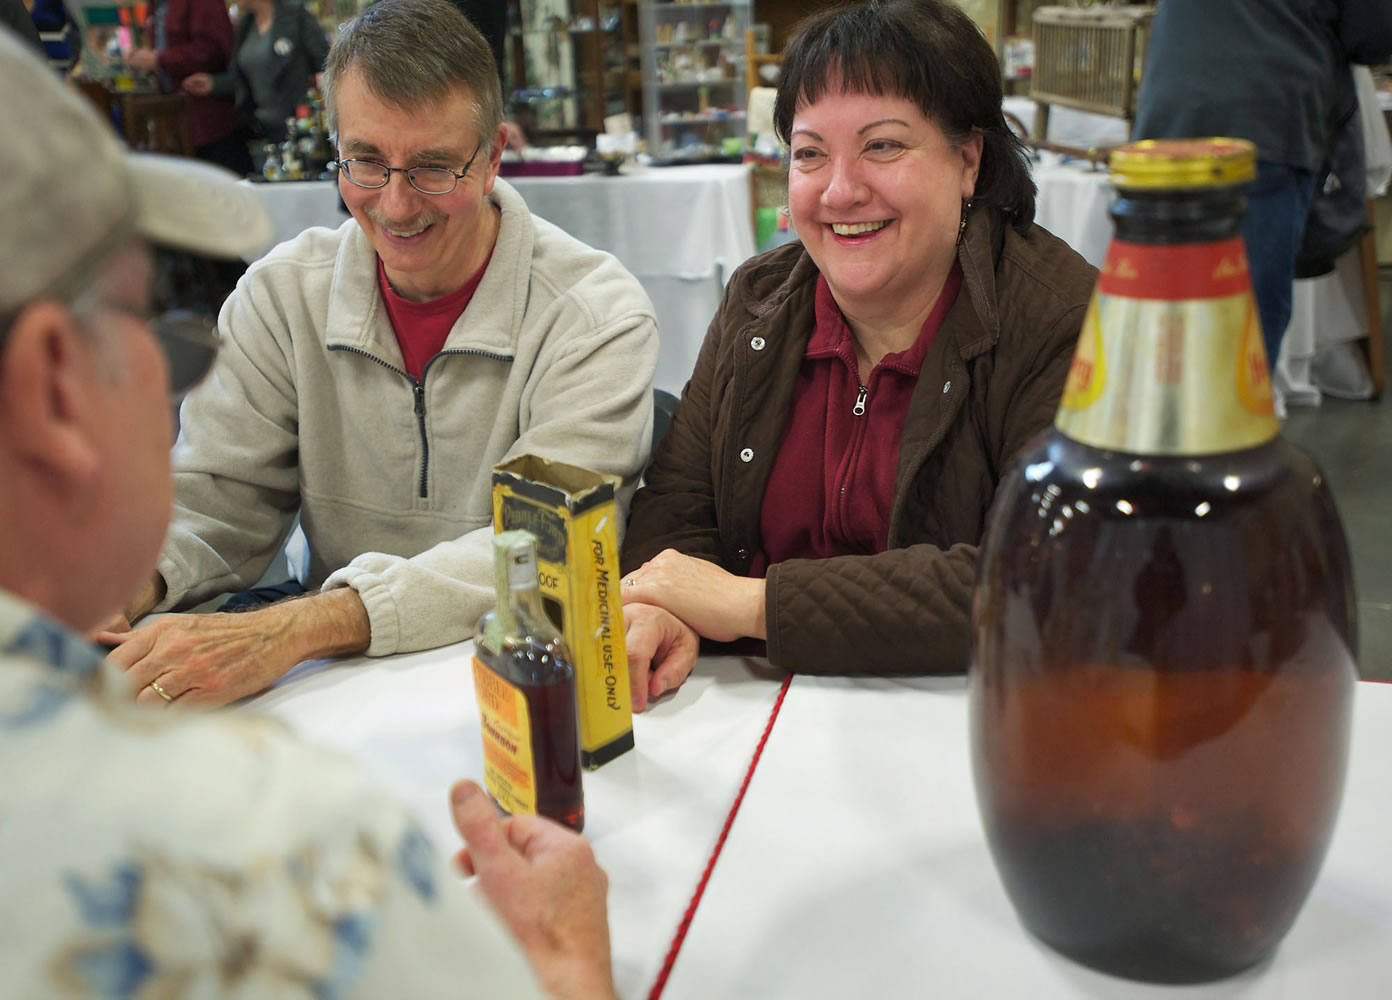 Bob and Debbie Mabry of Beaverton, Ore., talk Saturday to appraiser Randy Coe at the Clark County Antique and Collectible Show about an old bottle of bourbon they found.